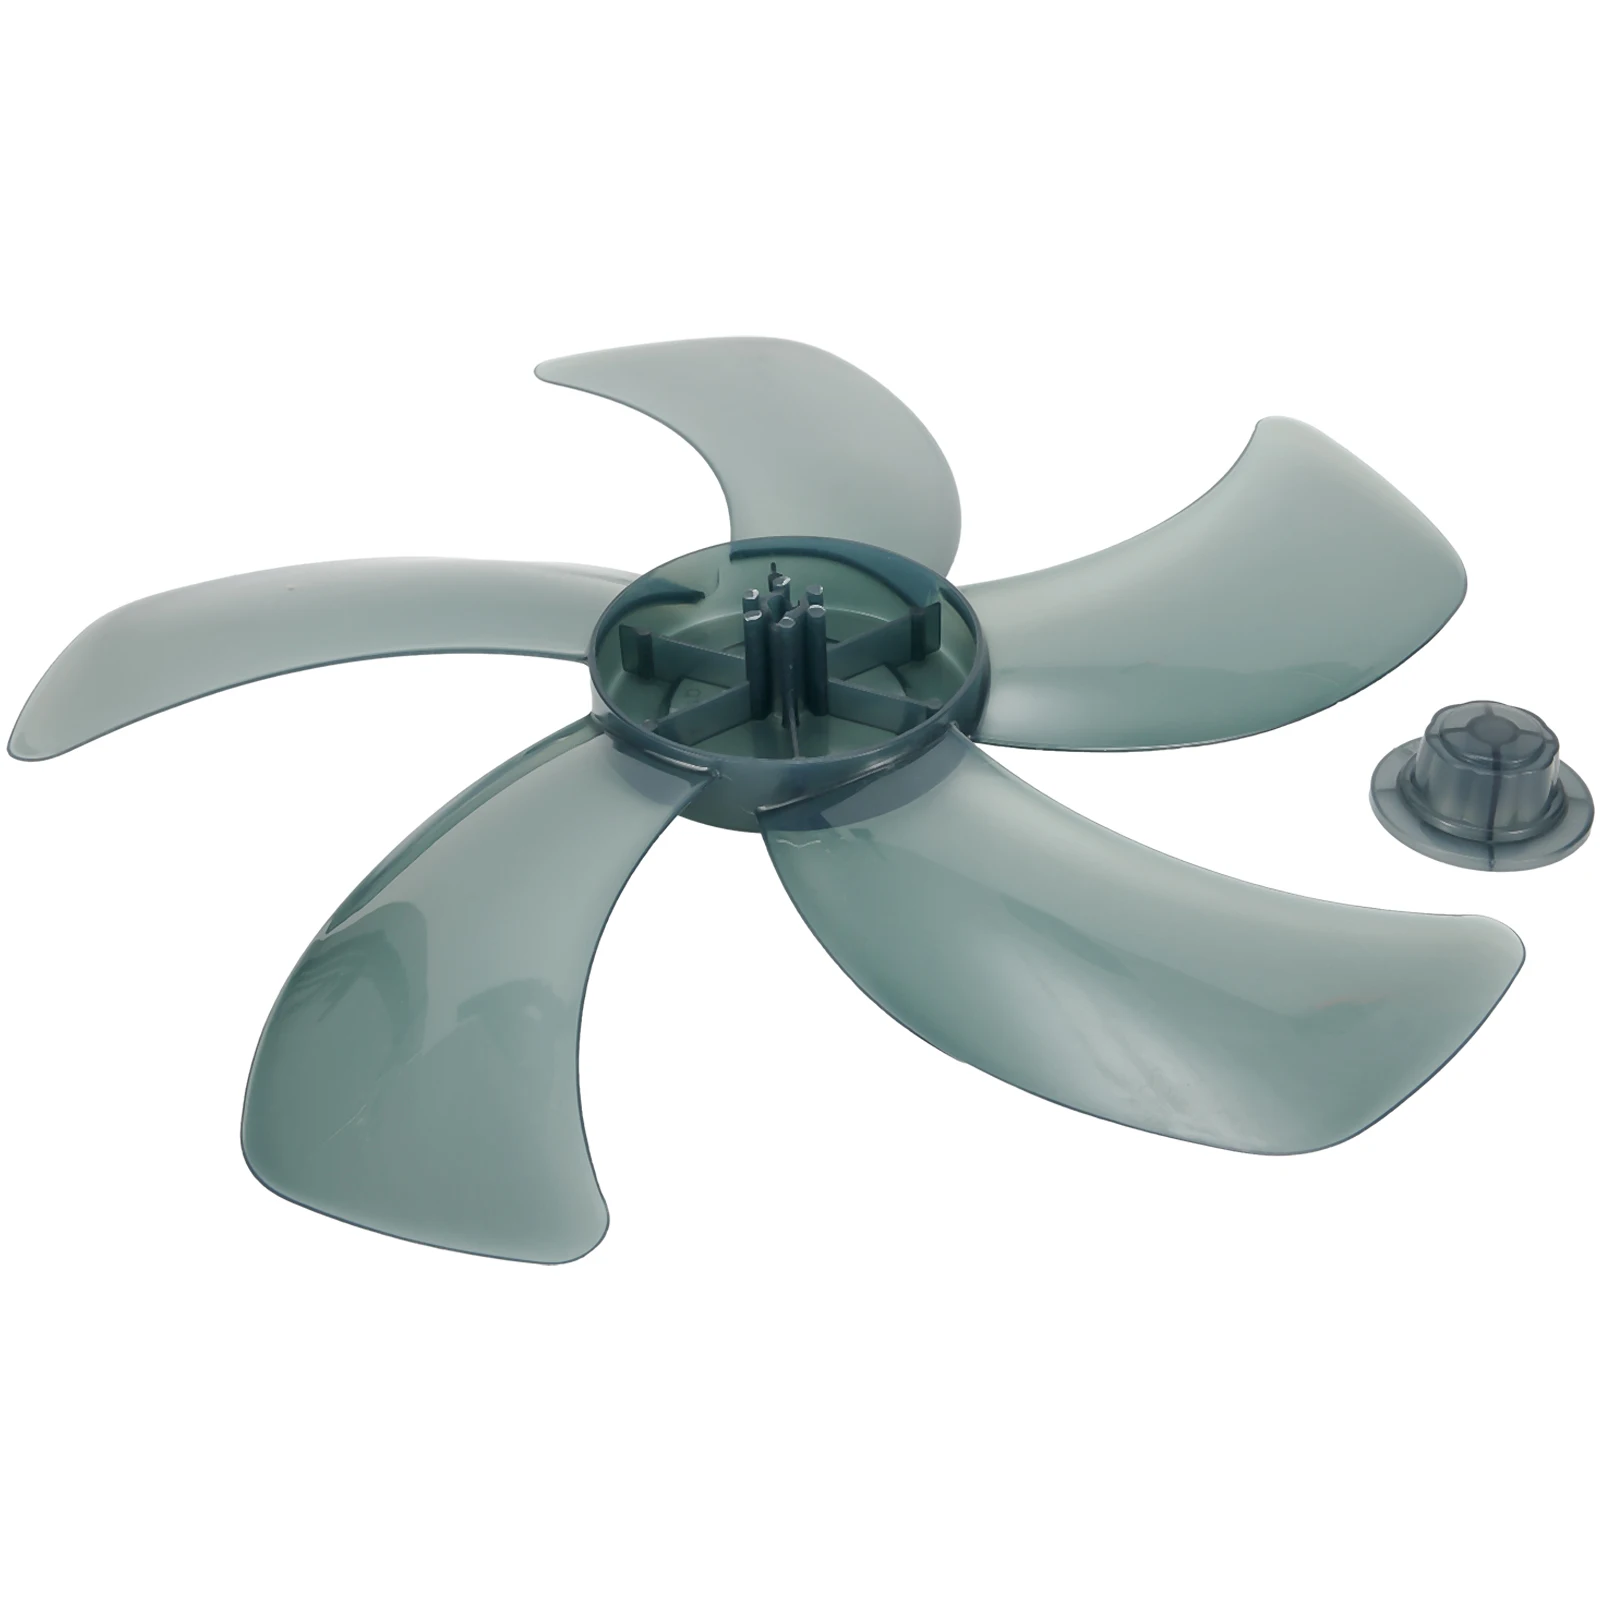 

Accessories Fan Blade Wind Blade With Nut Cover Mini Leaf Floor Fan Plastic Slow Noise 5 Leaves For Pedestal Brand New